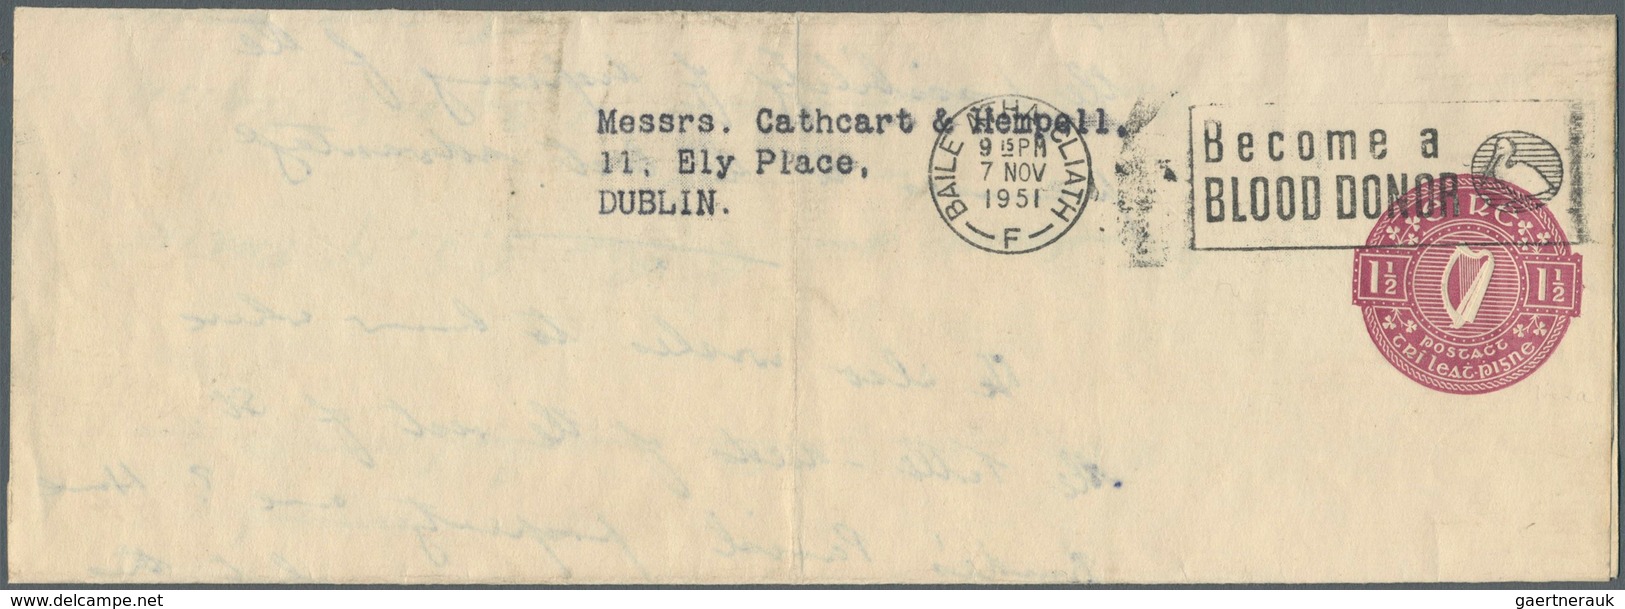 Irland - Ganzsachen: The Legal Diary: 1951, 1 1/2 D. Violet Newspaper Wrapper With Watermark, Used L - Postal Stationery